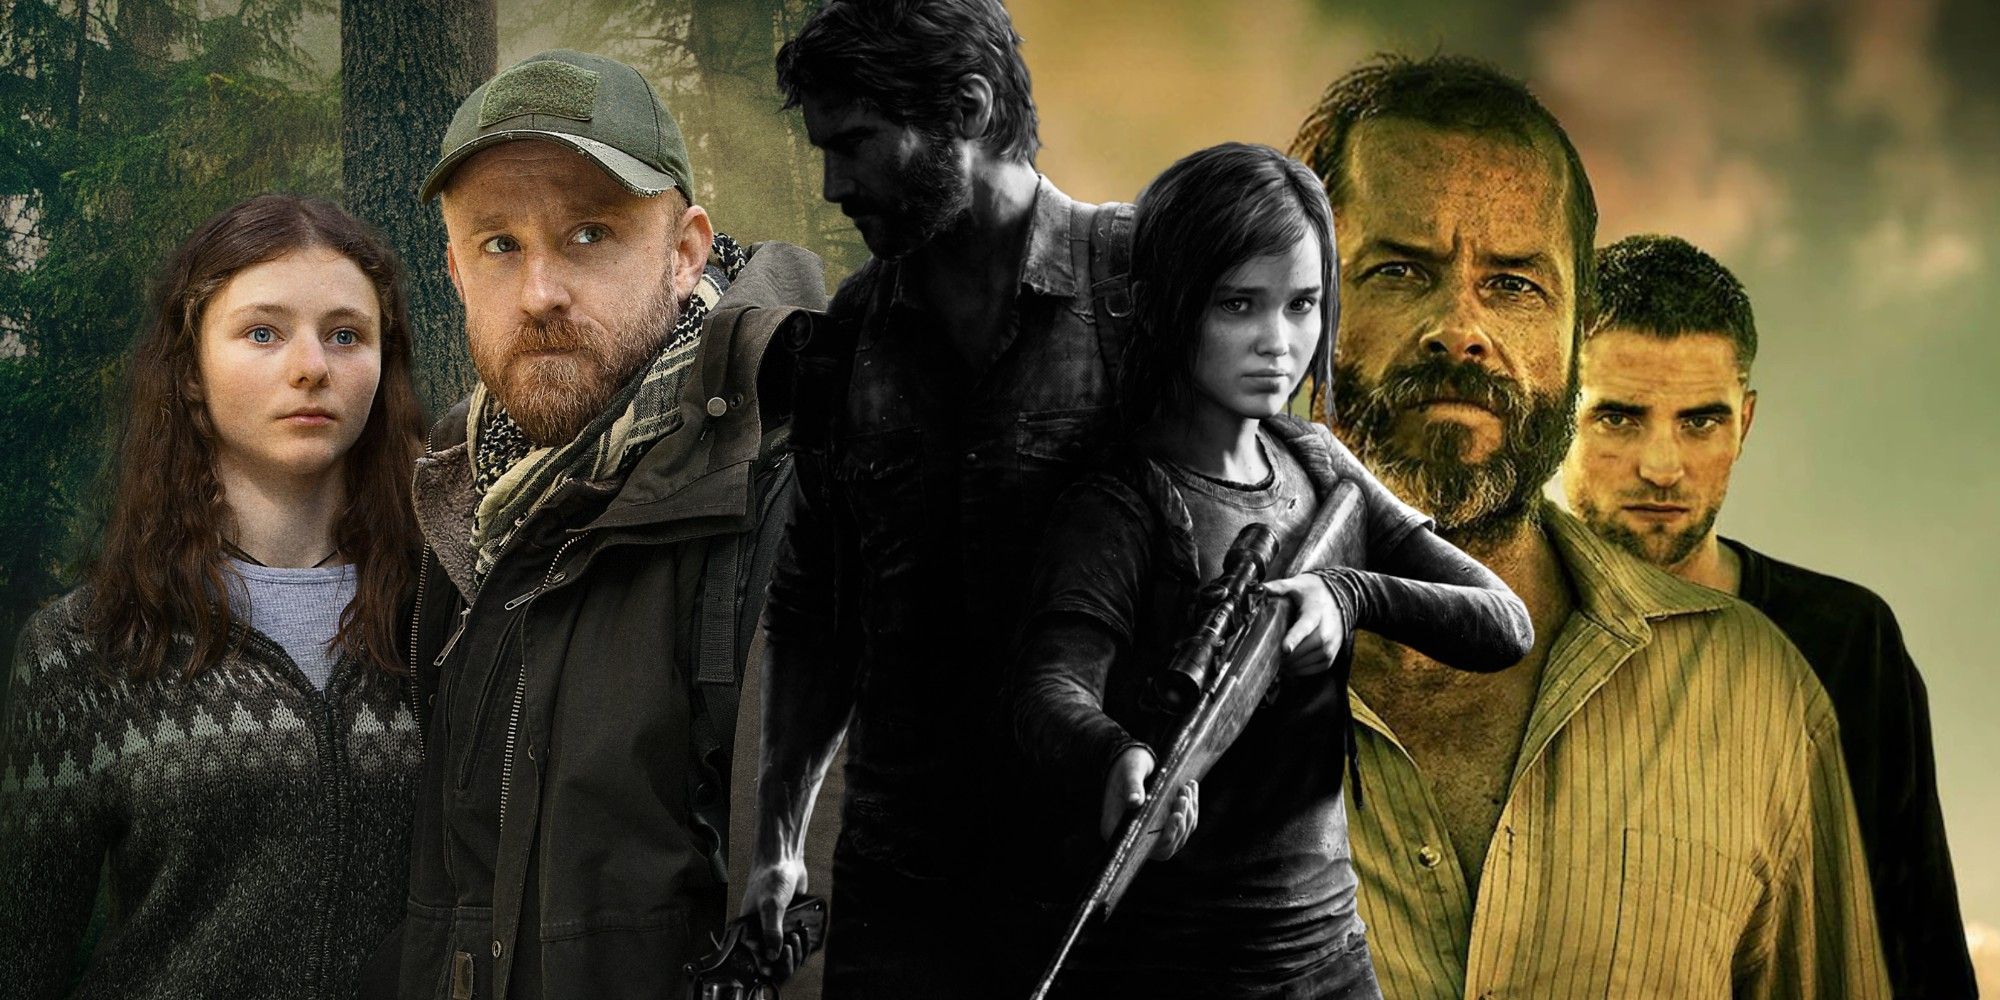 Love The Last of Us? 18 Apocalyptic and Zombie Movies and Shows to Watch  Next